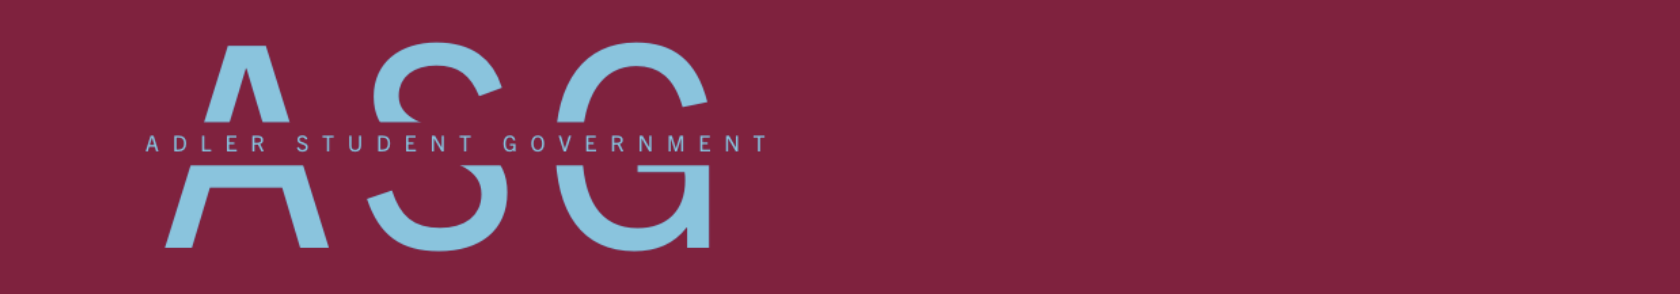 Dark red background with light blue letters that say ASG - Adler Student Government